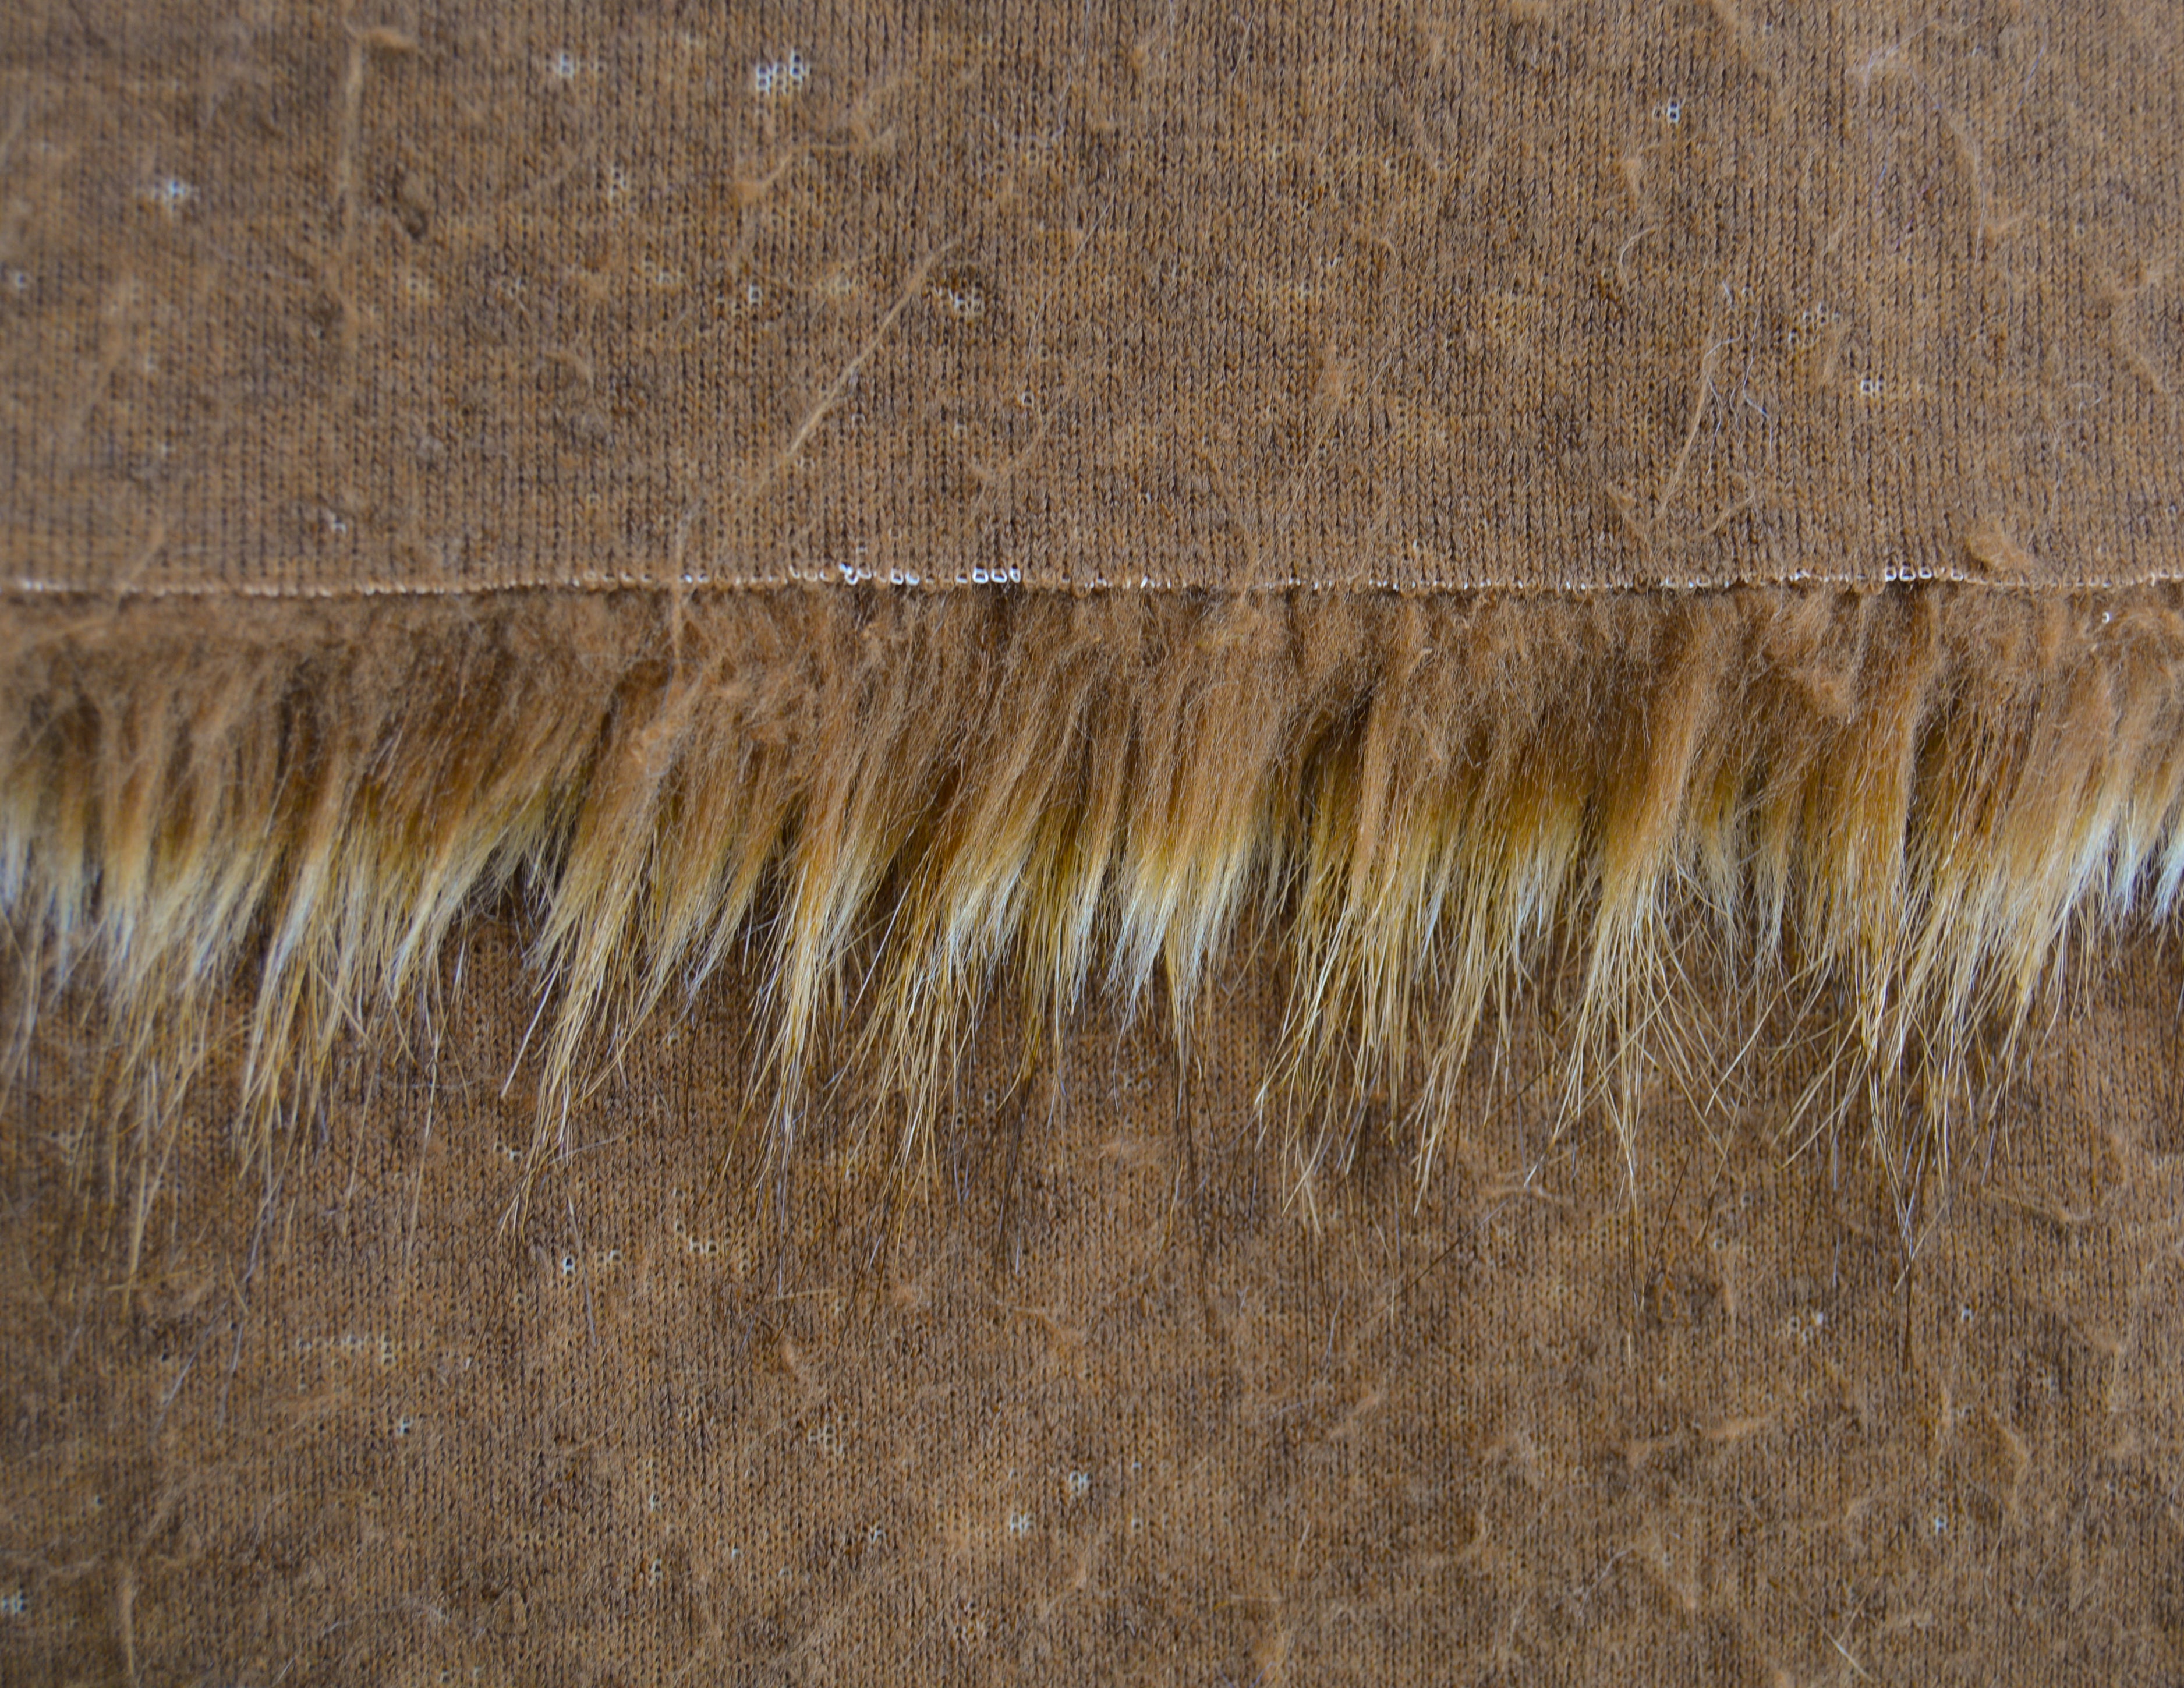 Backing of grizzly brown faux fur fabric showing the long pile length of the fake fur.